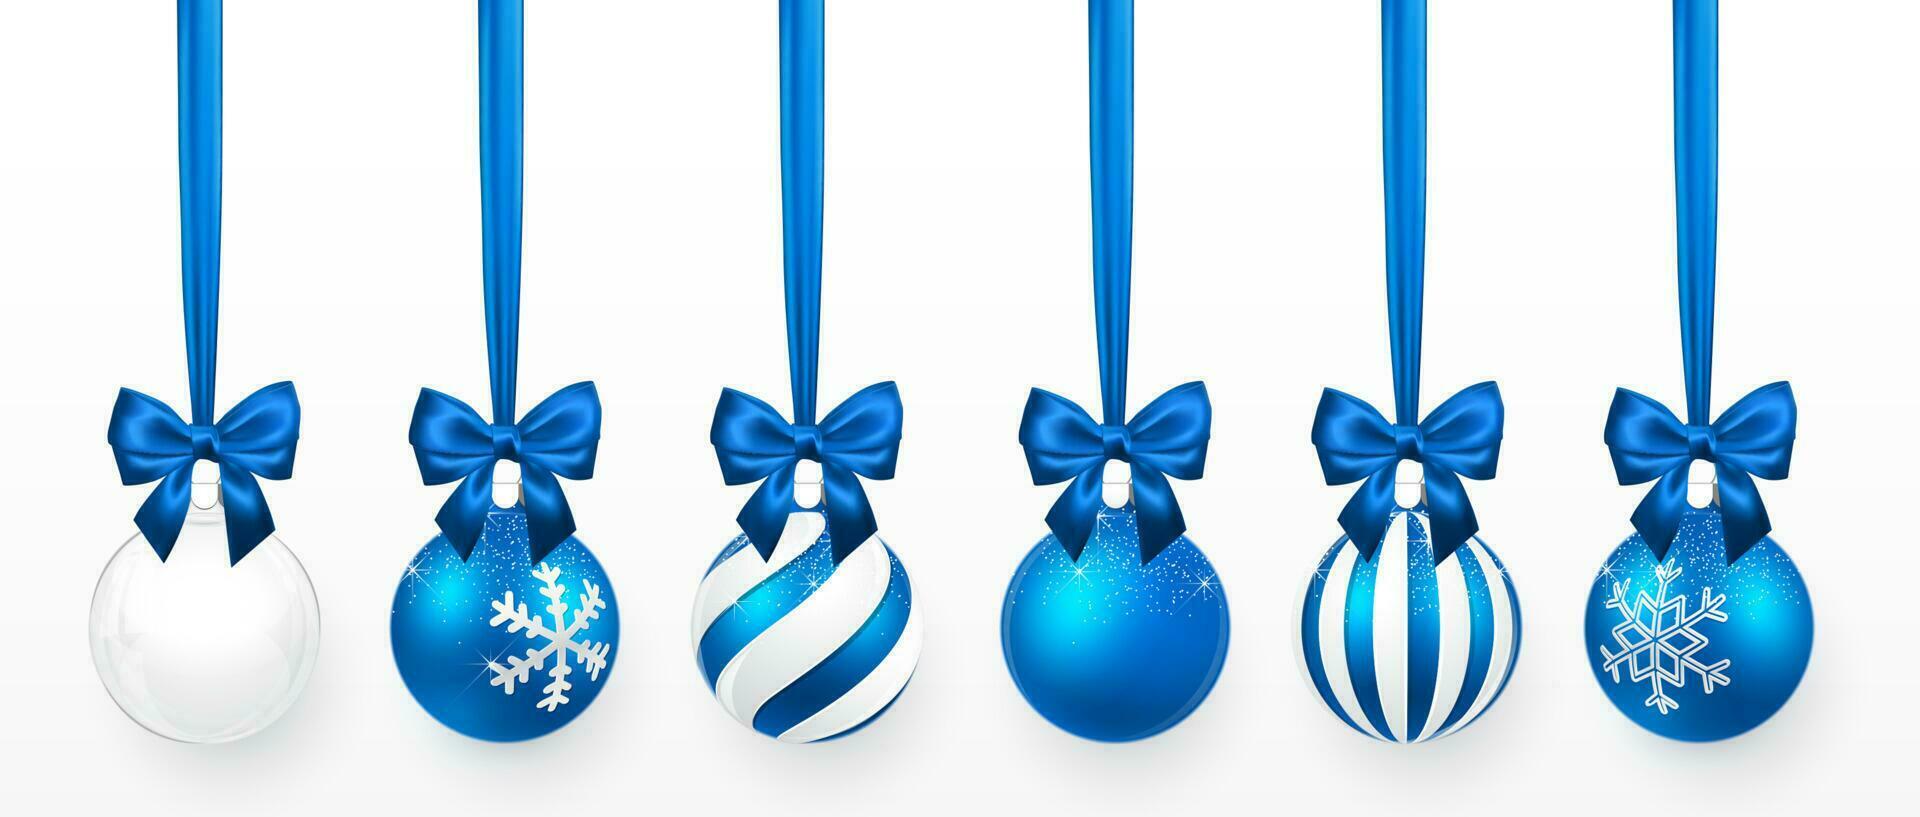 Transparent and Blue Christmas ball with snow effect and blue bow set. Xmas glass ball on white background. Holiday decoration template. Vector illustration